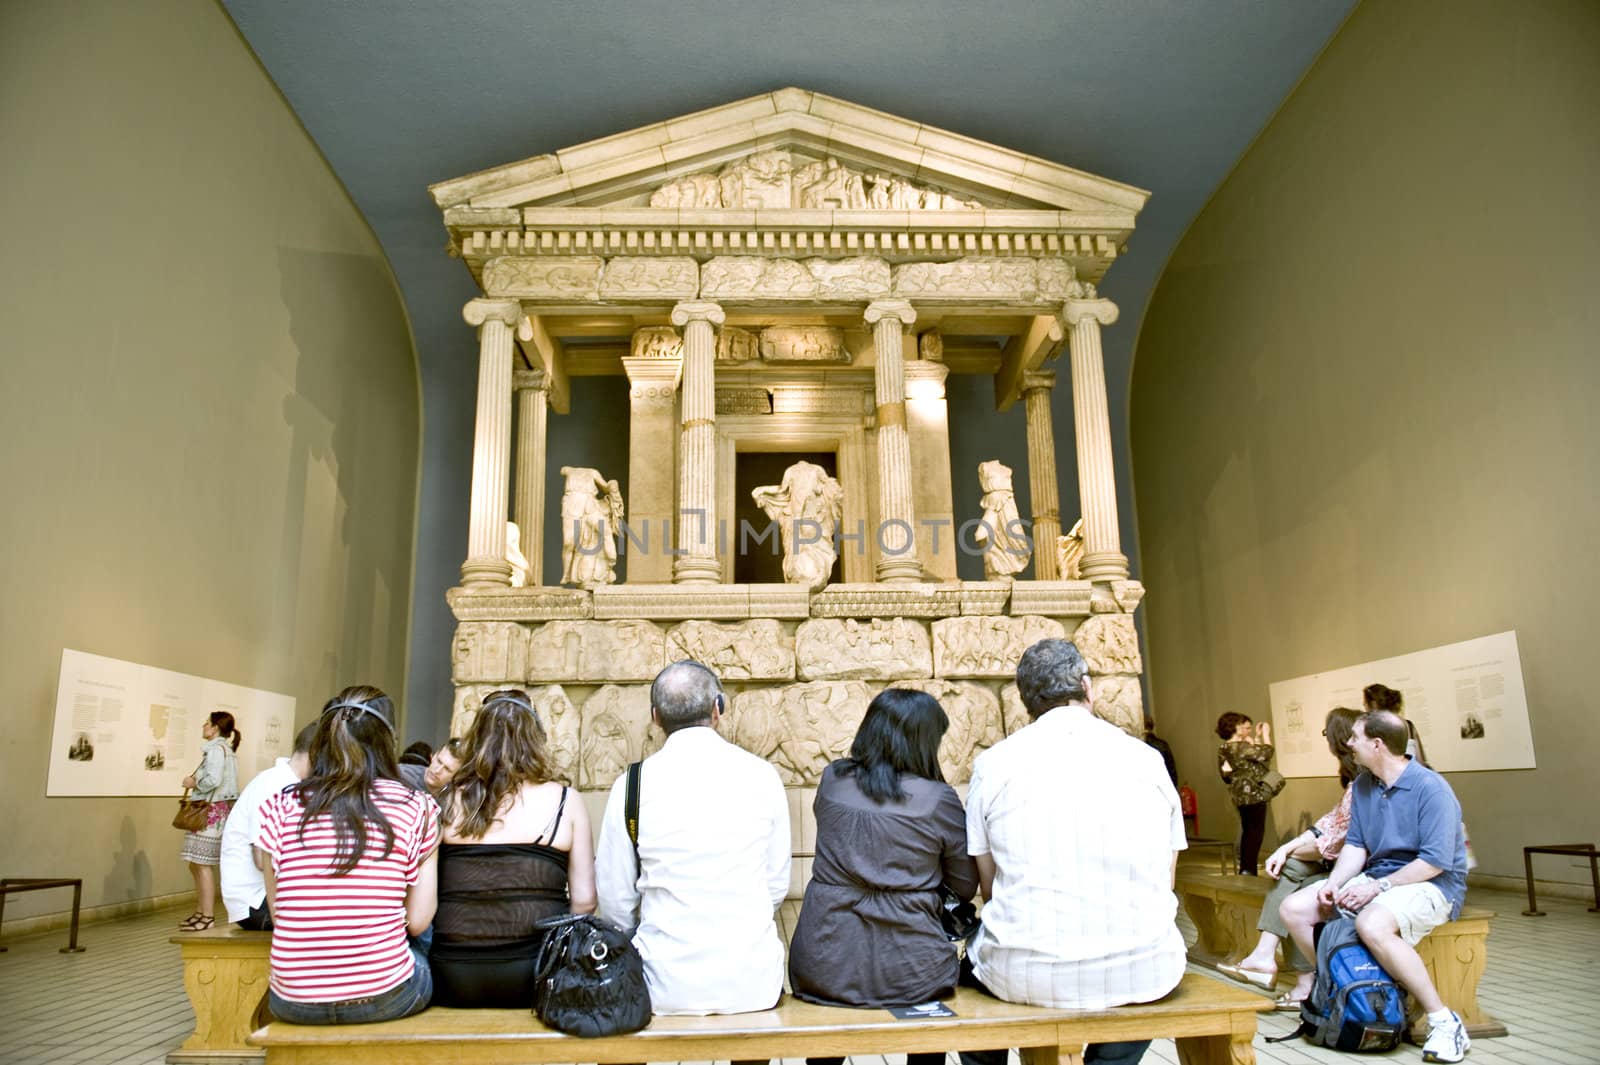 Tourists in the antigue hall of Britich museum